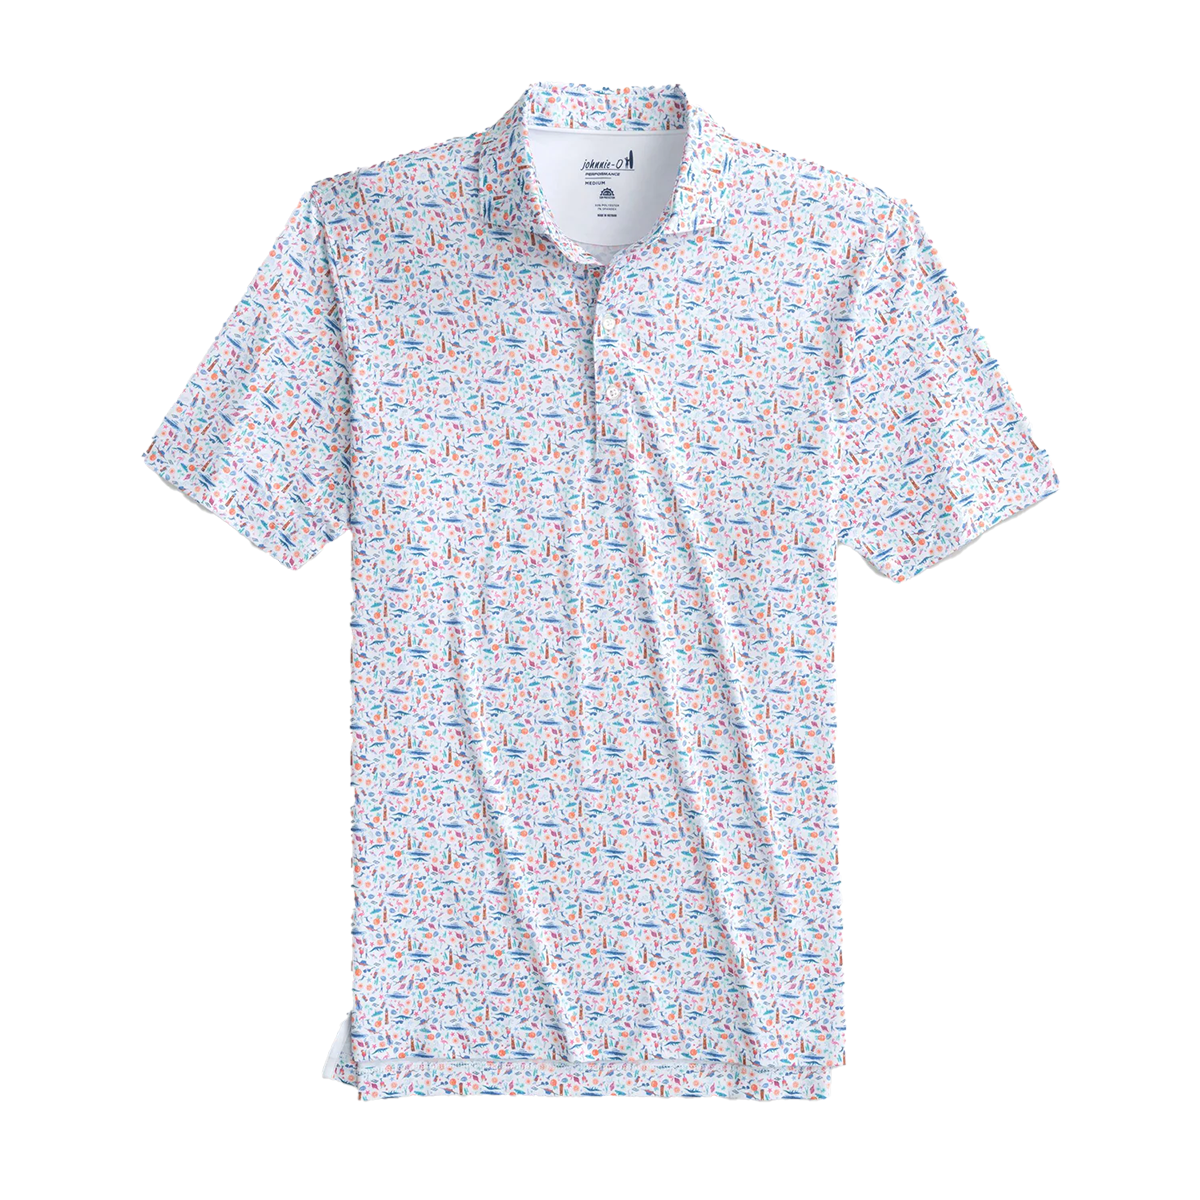 Johnnie-O Sunshine State Polo, , large image number null